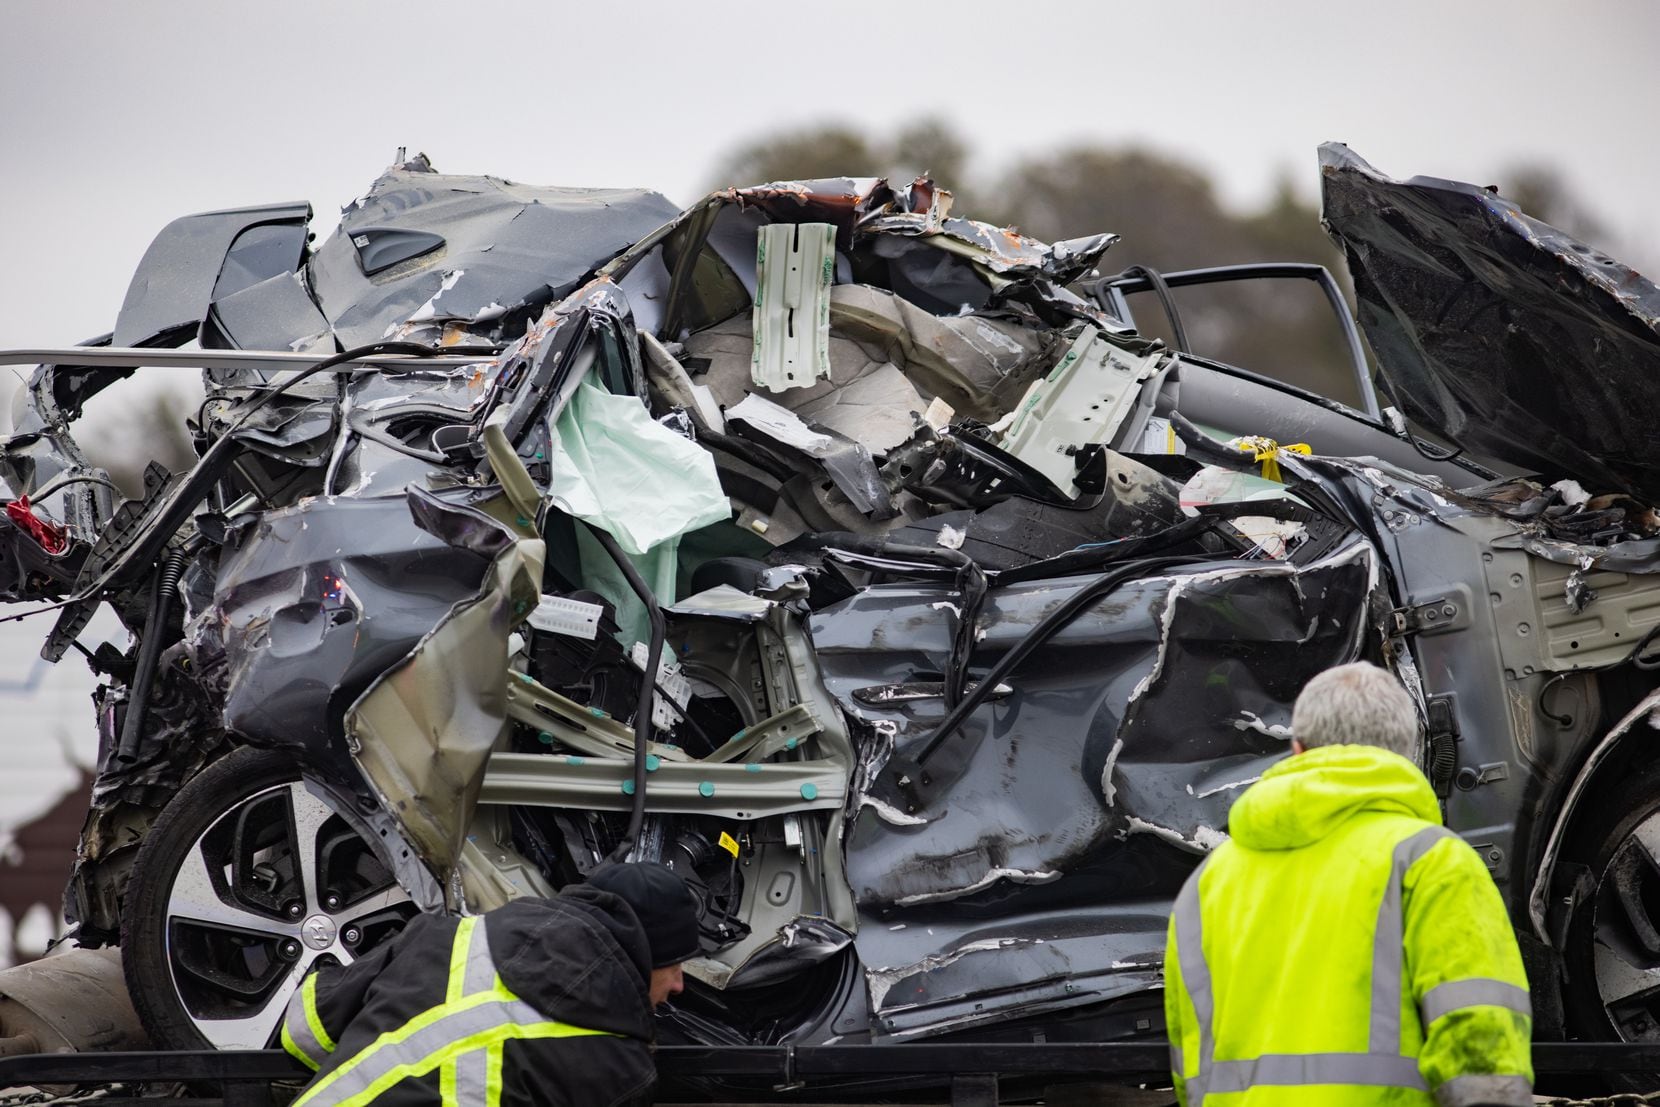 A crumbled car is towed as emergency crews work to clear the mass casualty pile-up on I-35W and Northside Drive in Fort Worth on Thursday, Feb. 11, 2021. (Juan Figueroa/ The Dallas Morning News)